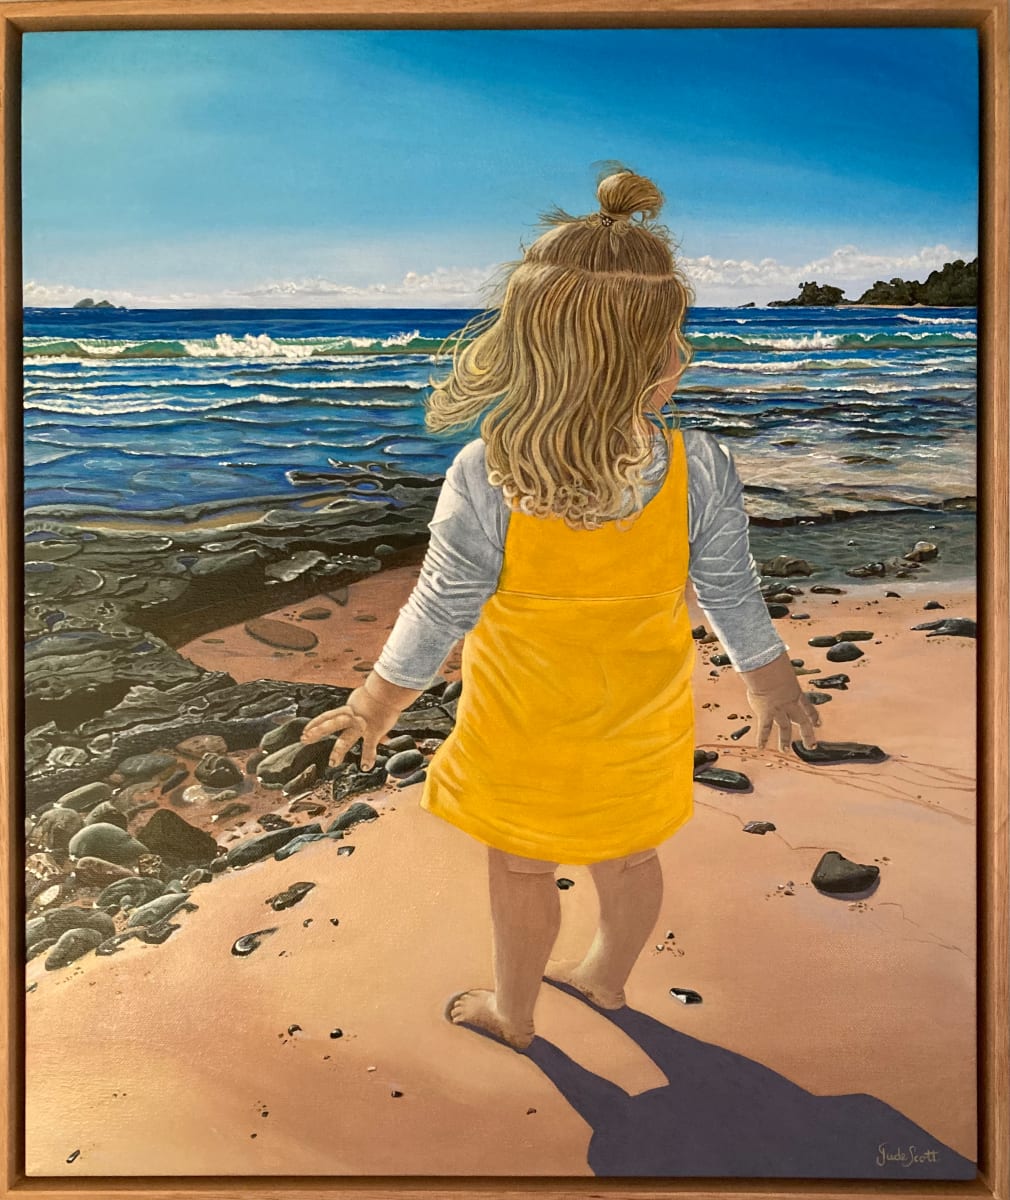 Looking for Dolphins by Jude Scott  Image: I grew up near the beach and always feel very connected in this environment. During a beach walk, I snapped a photo of my great niece and with permission, recreated this painting. Using acrylic on canvas, it depicts a little girl interrupting her sand play with hopeful expectation of seeing dolphins, hand poised in anticipation as she gazes out over the waves. The magic & excitement of seeing dolphins captures our hearts & imagination no matter what age. 